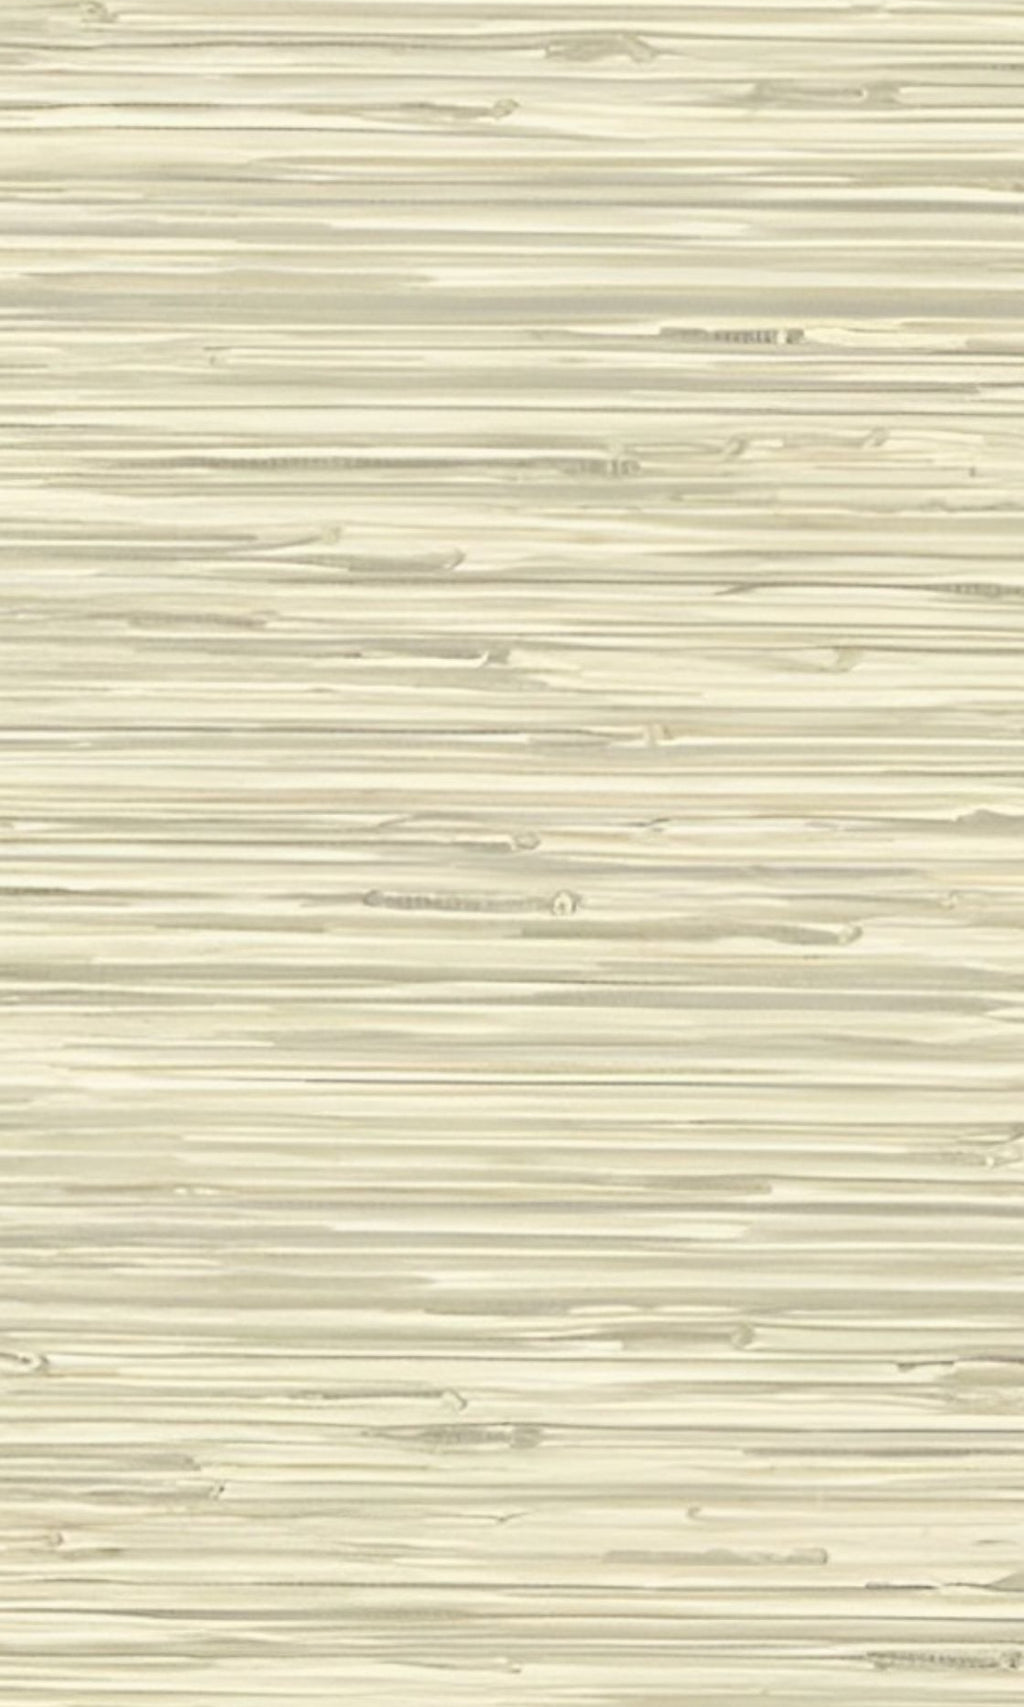 Willow Branch Grasscloth Inspired Vinyl Commercial CPW1070